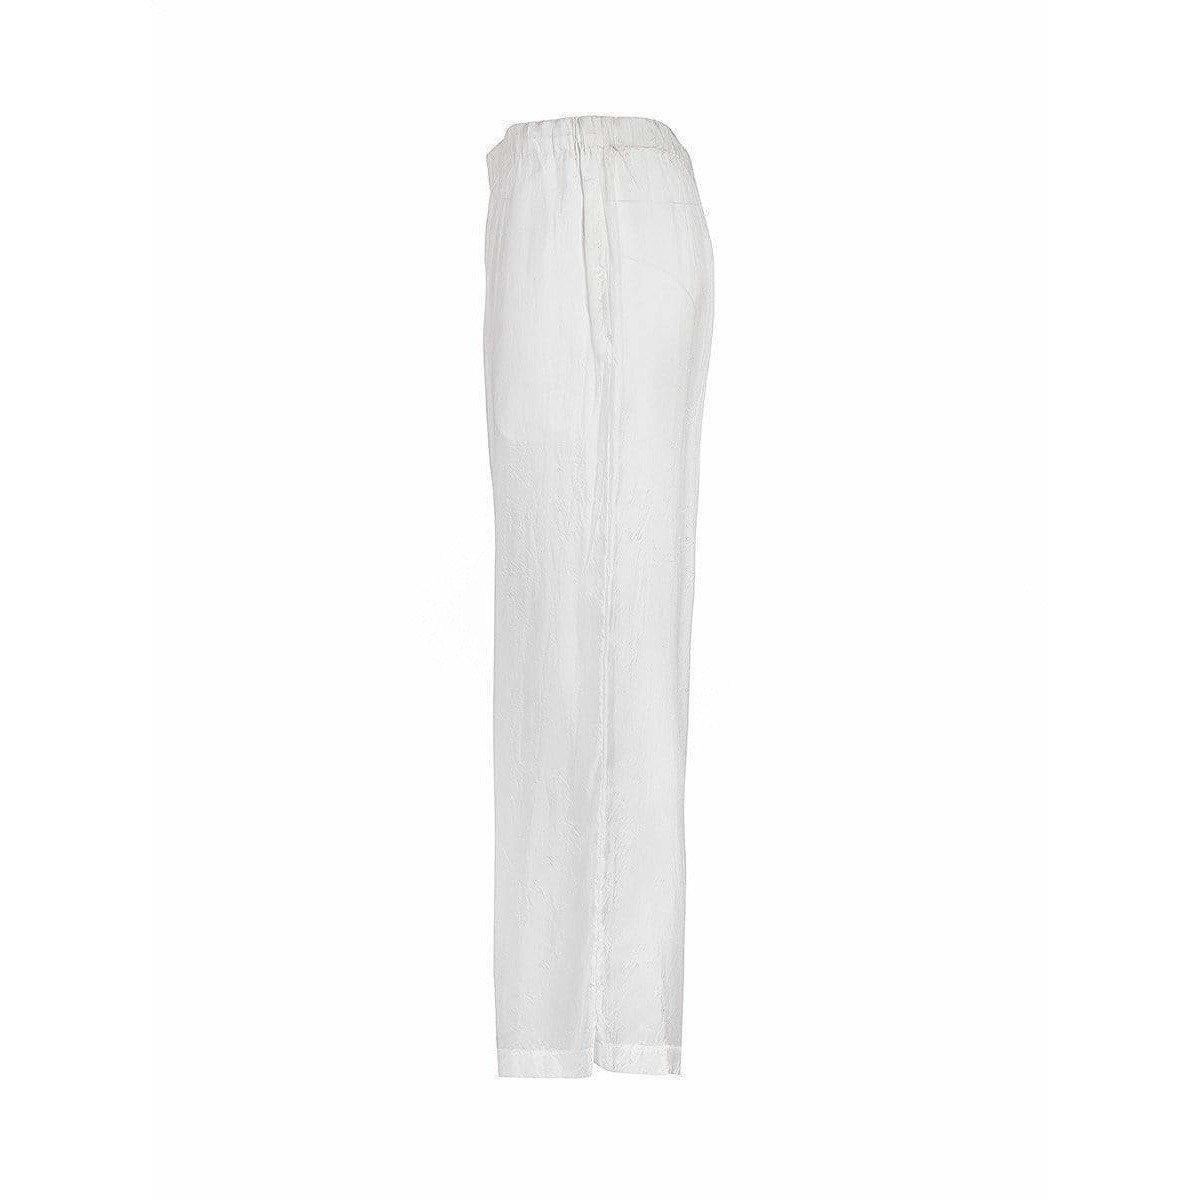 Soft silk straight leg pant in white has side seam pockets, side seam slits at the ankle and a comfortable elastic waist, with inner drawstring tie, from vintage Comme des Garçons.